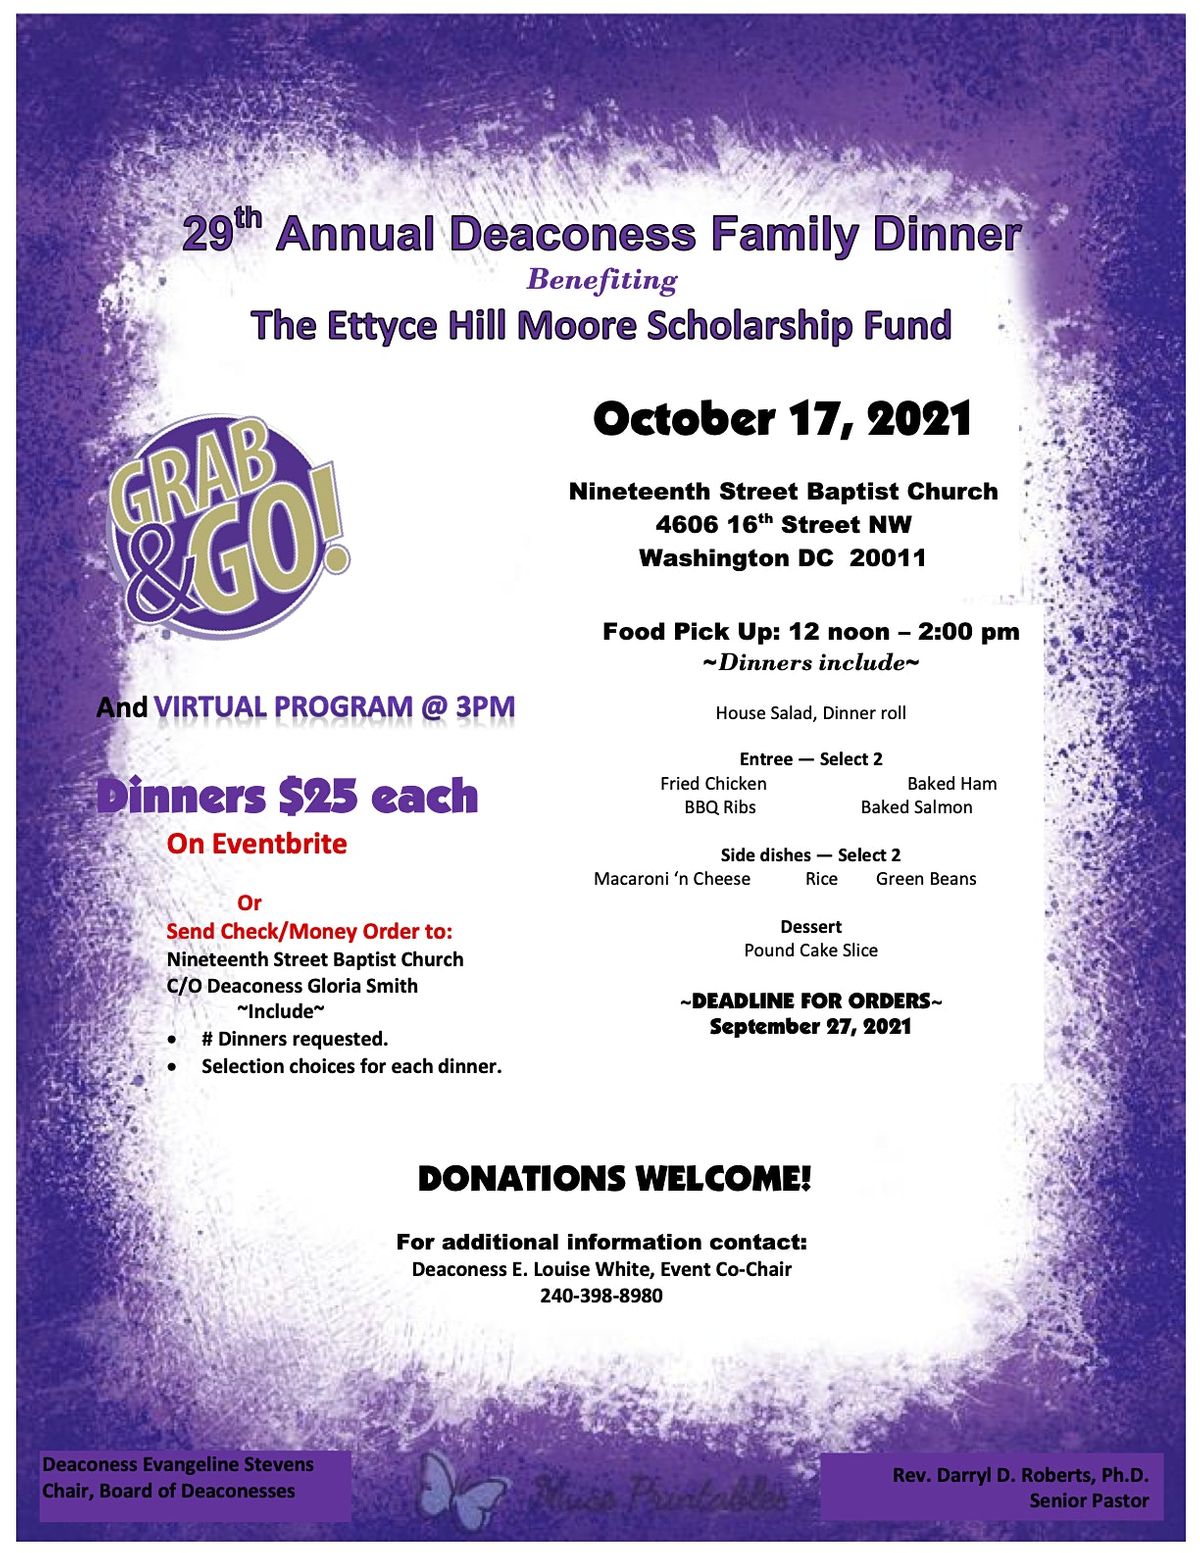 29th Annual Deaconess Family Dinner